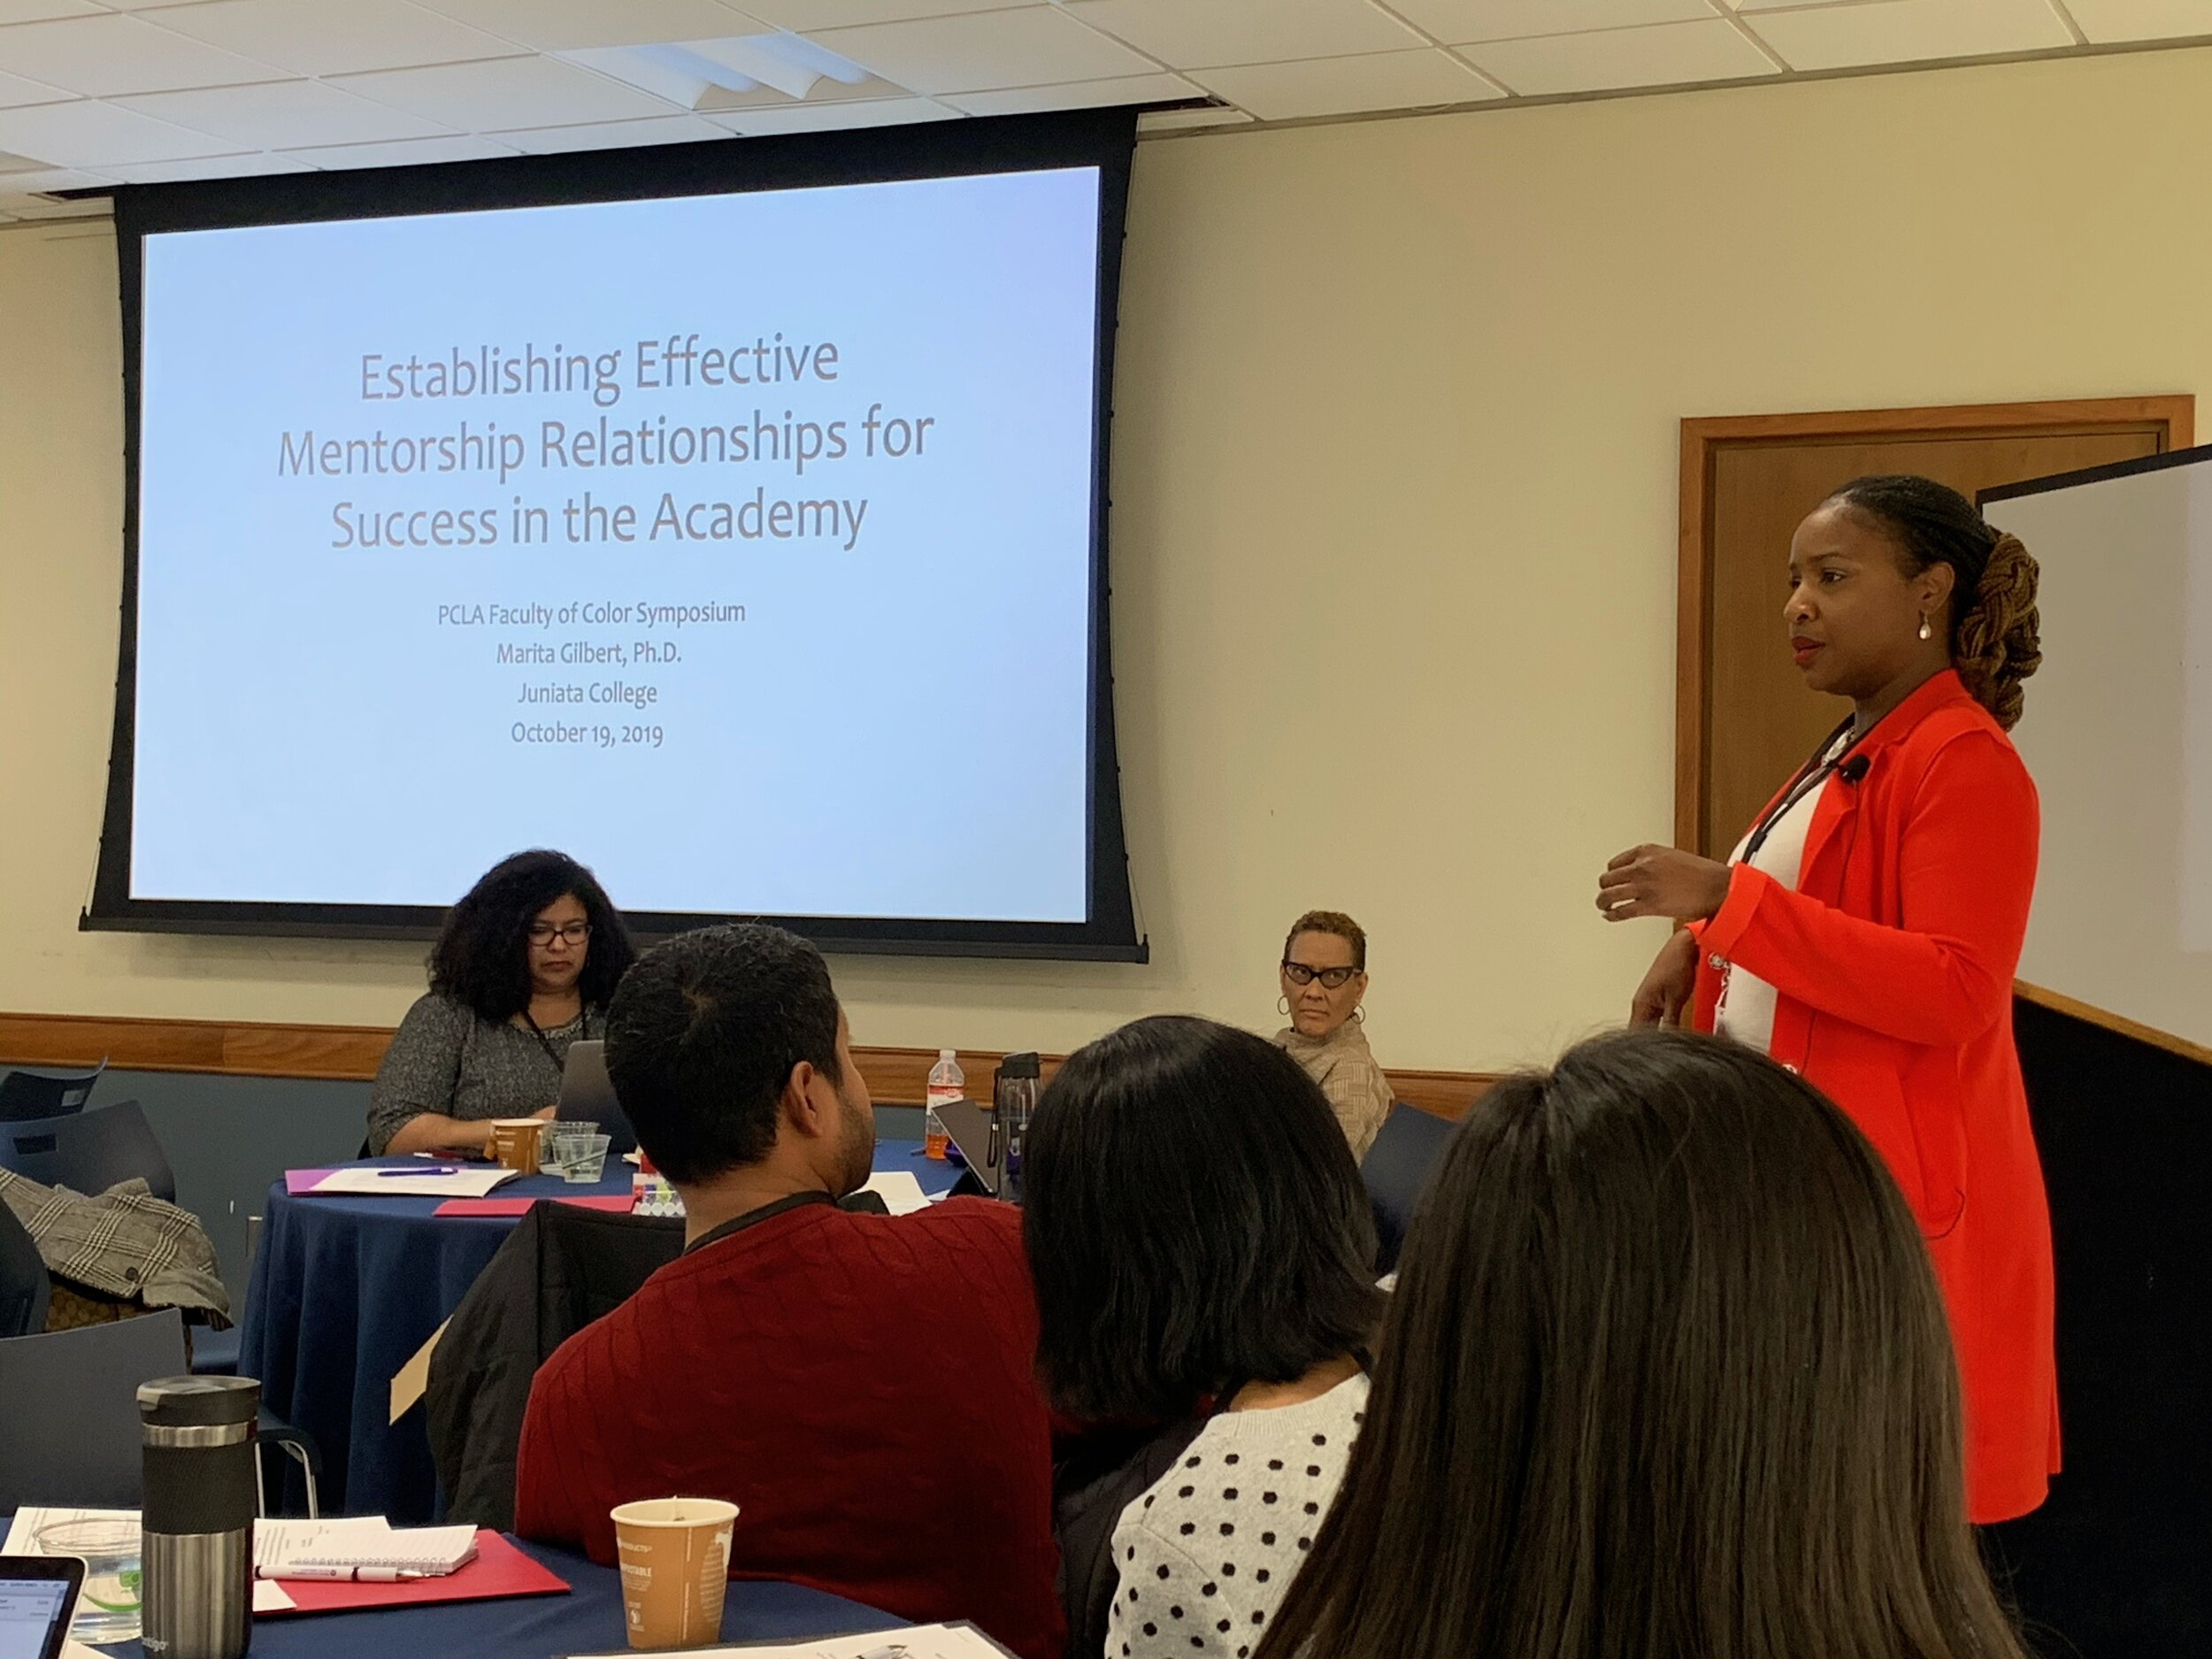 Marita Gilbert, PhD, dean of Institutional Equity and Inclusive Excellence at Juniata College, leading the session on effective mentorship relationships.